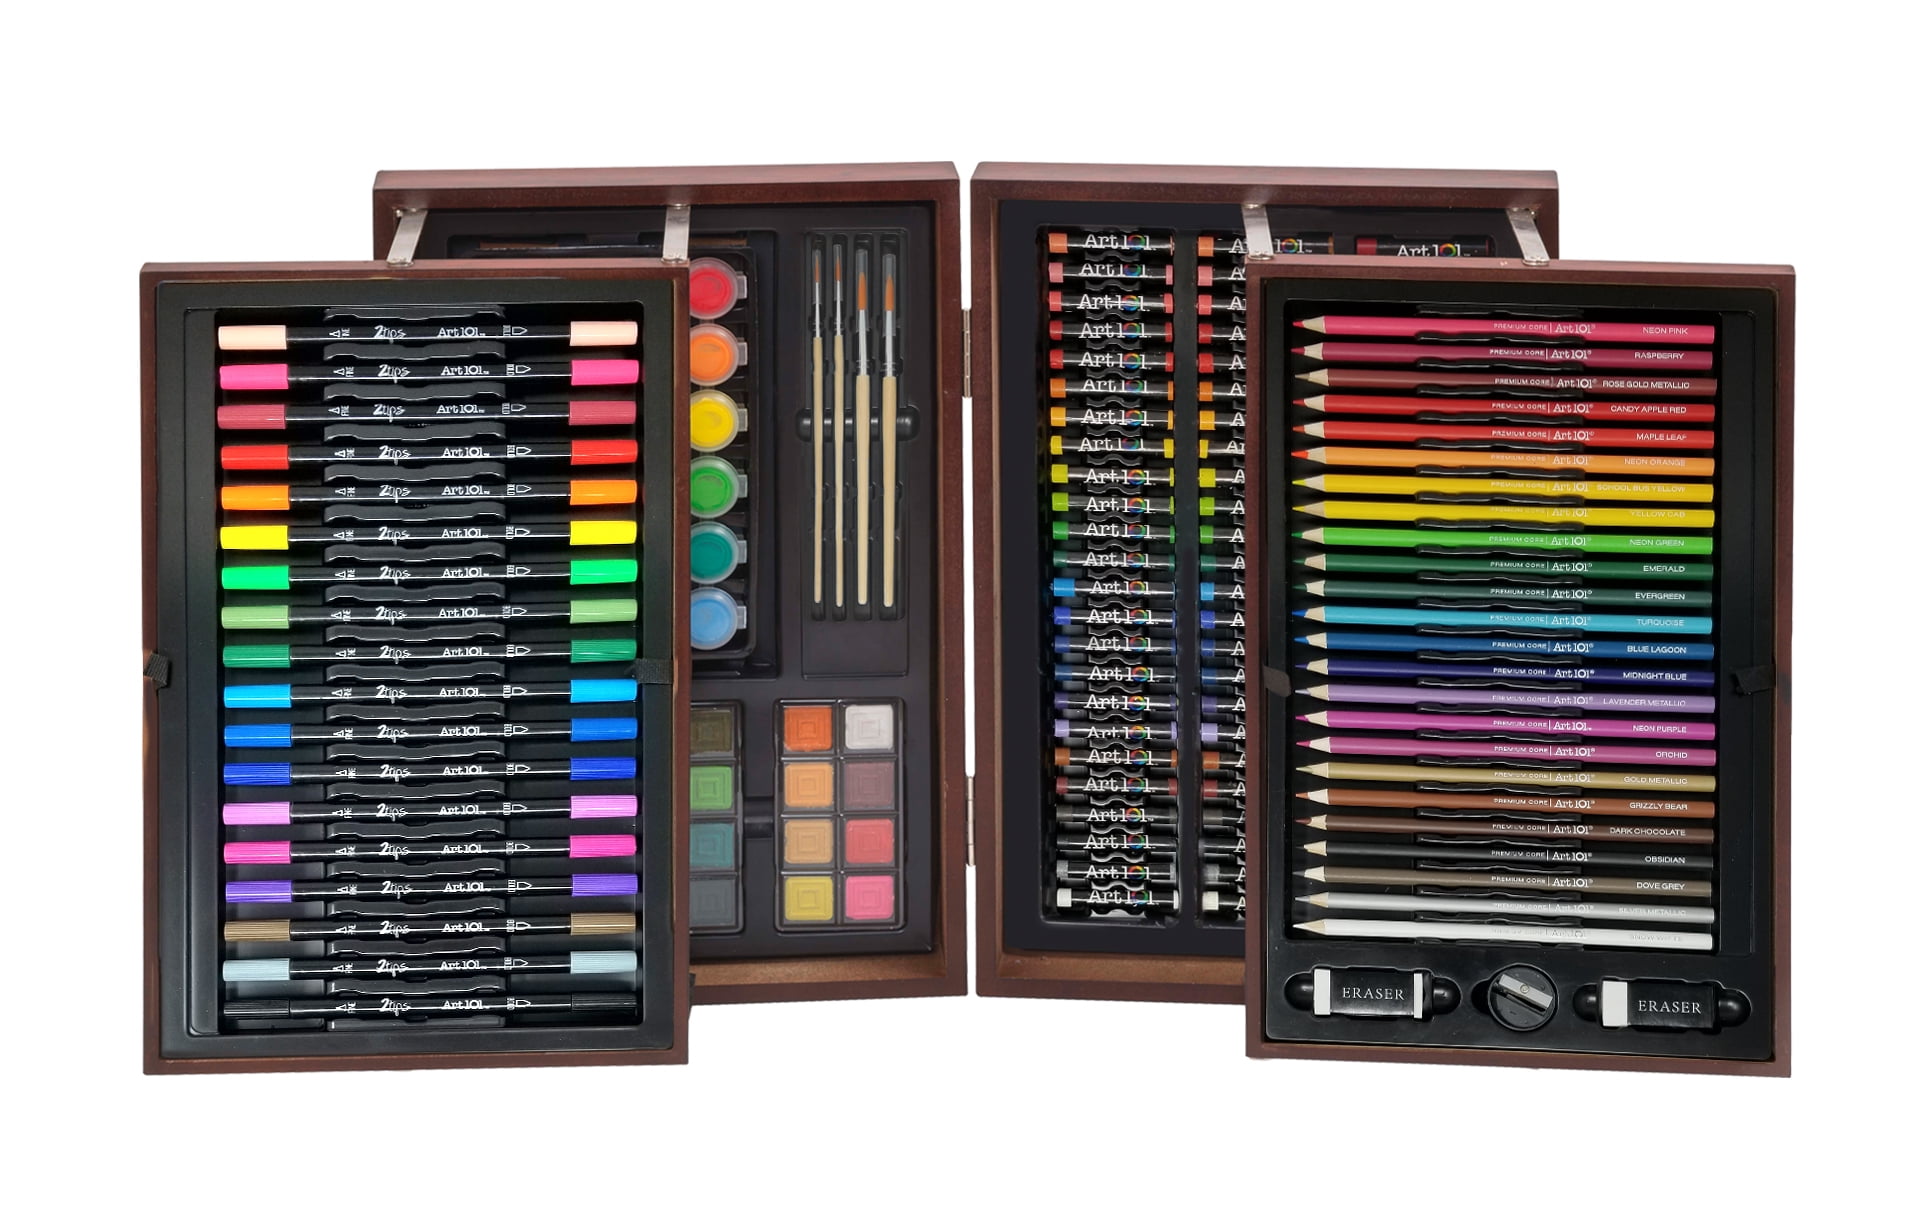 Art 101 Deluxe Multifunctional Art Set / Kit with 168 Pieces in a Wood Case  for Children to Adults - Yahoo Shopping